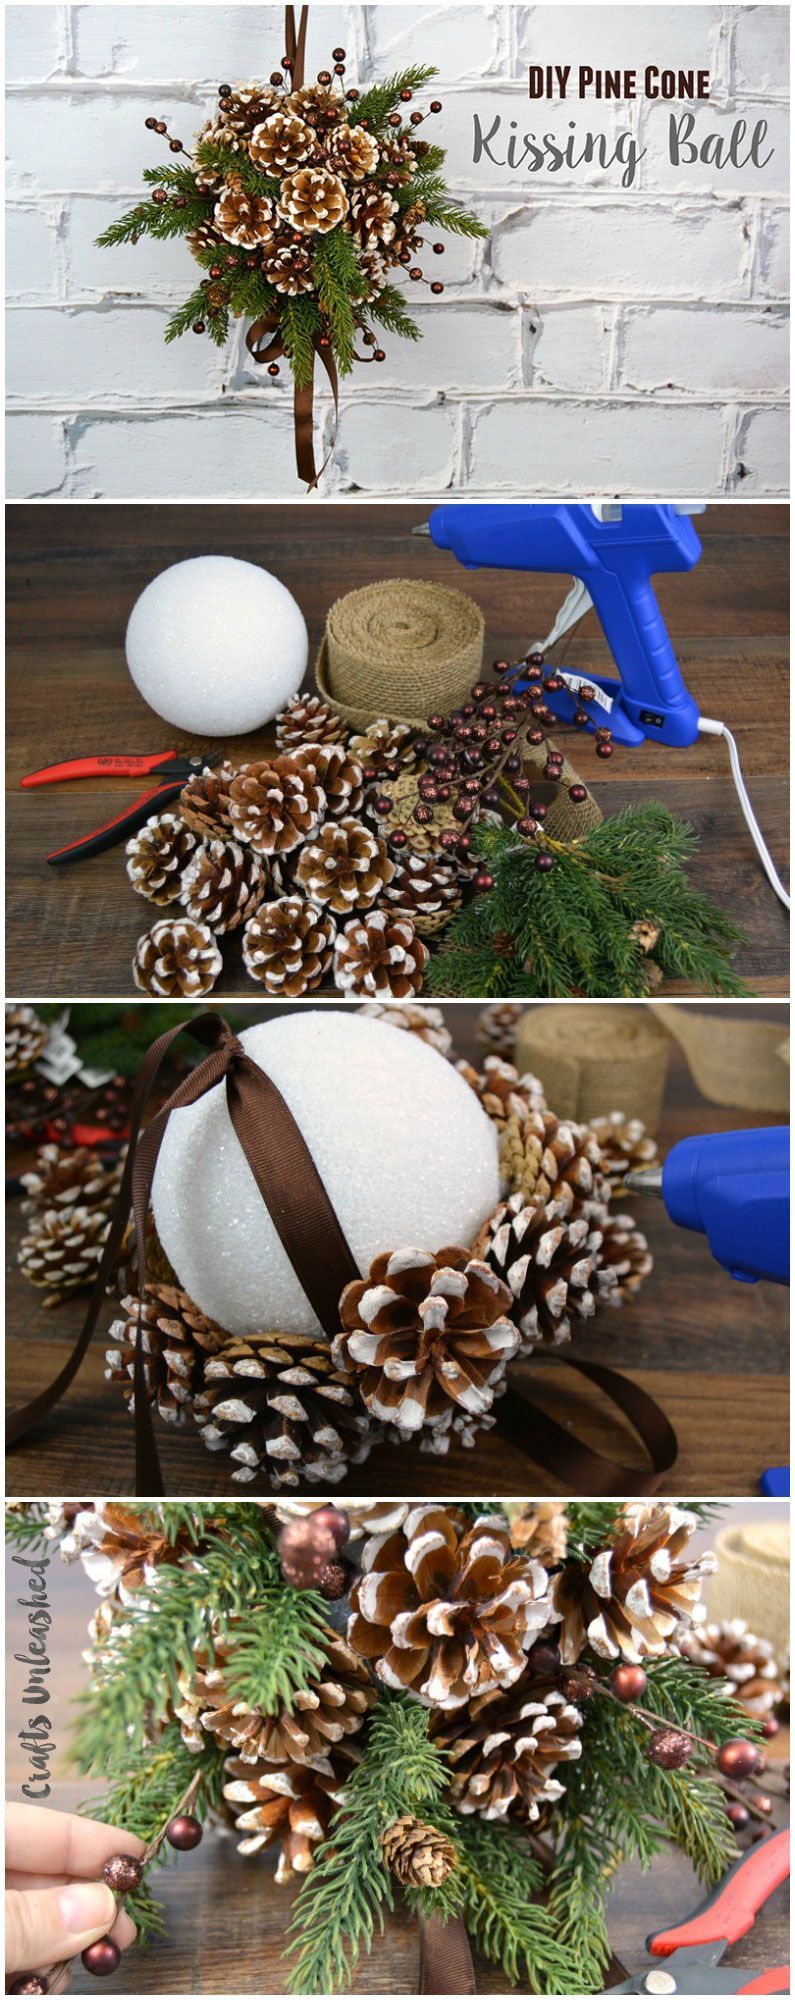 Need an alternative to the traditional winter wreath? This beautiful pine cone DIY kissing ball is the per